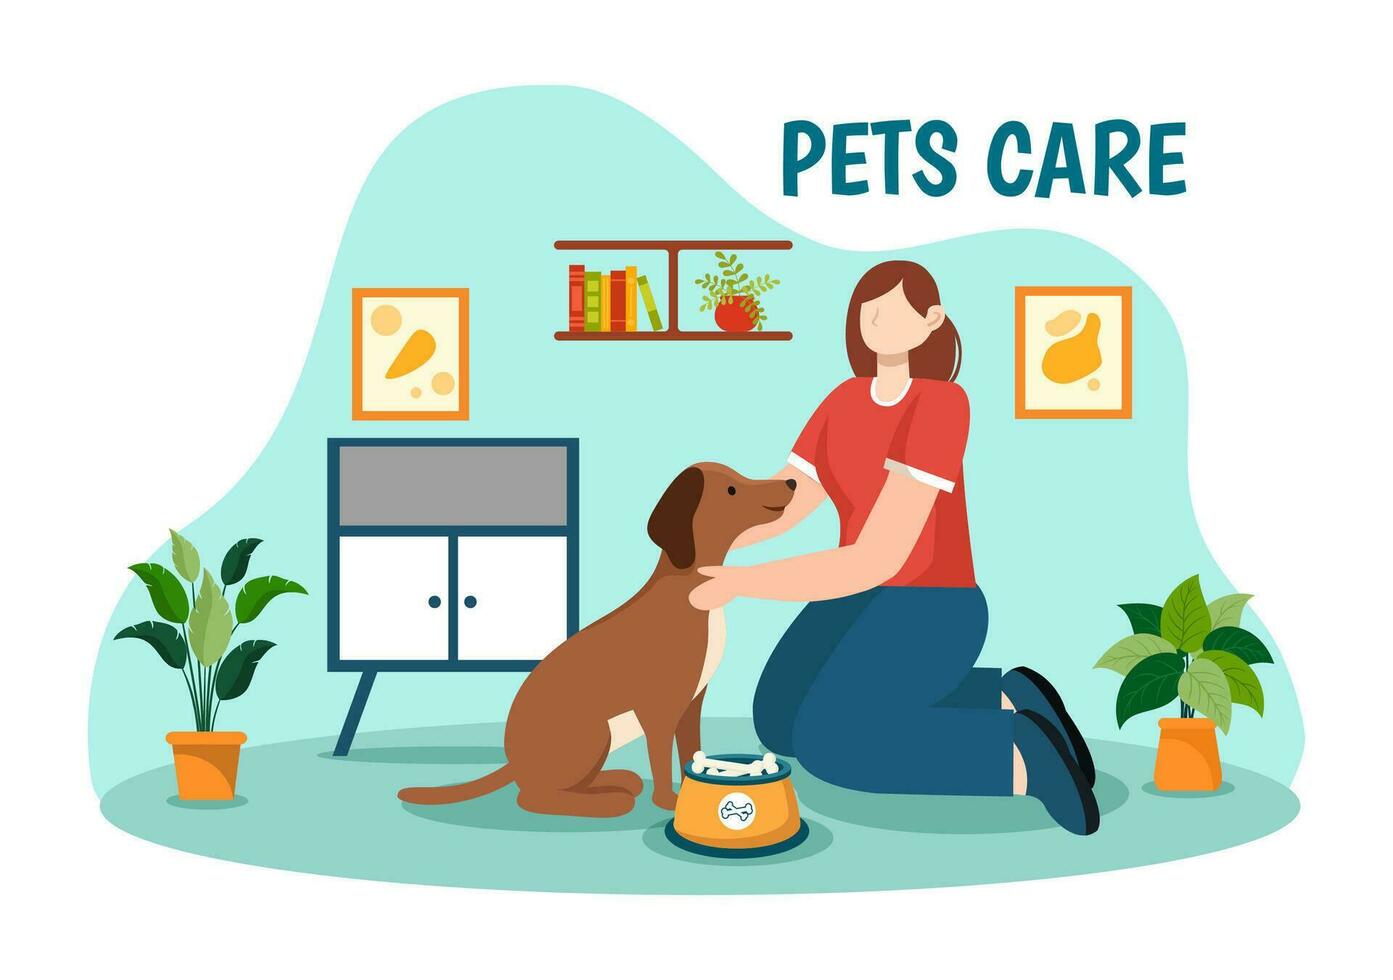 Pets Care Vector Illustration with Animal Shelter or Vet Clinic for Taking Care of Dog or Cat in Healthcare Flat Cartoon Background Design